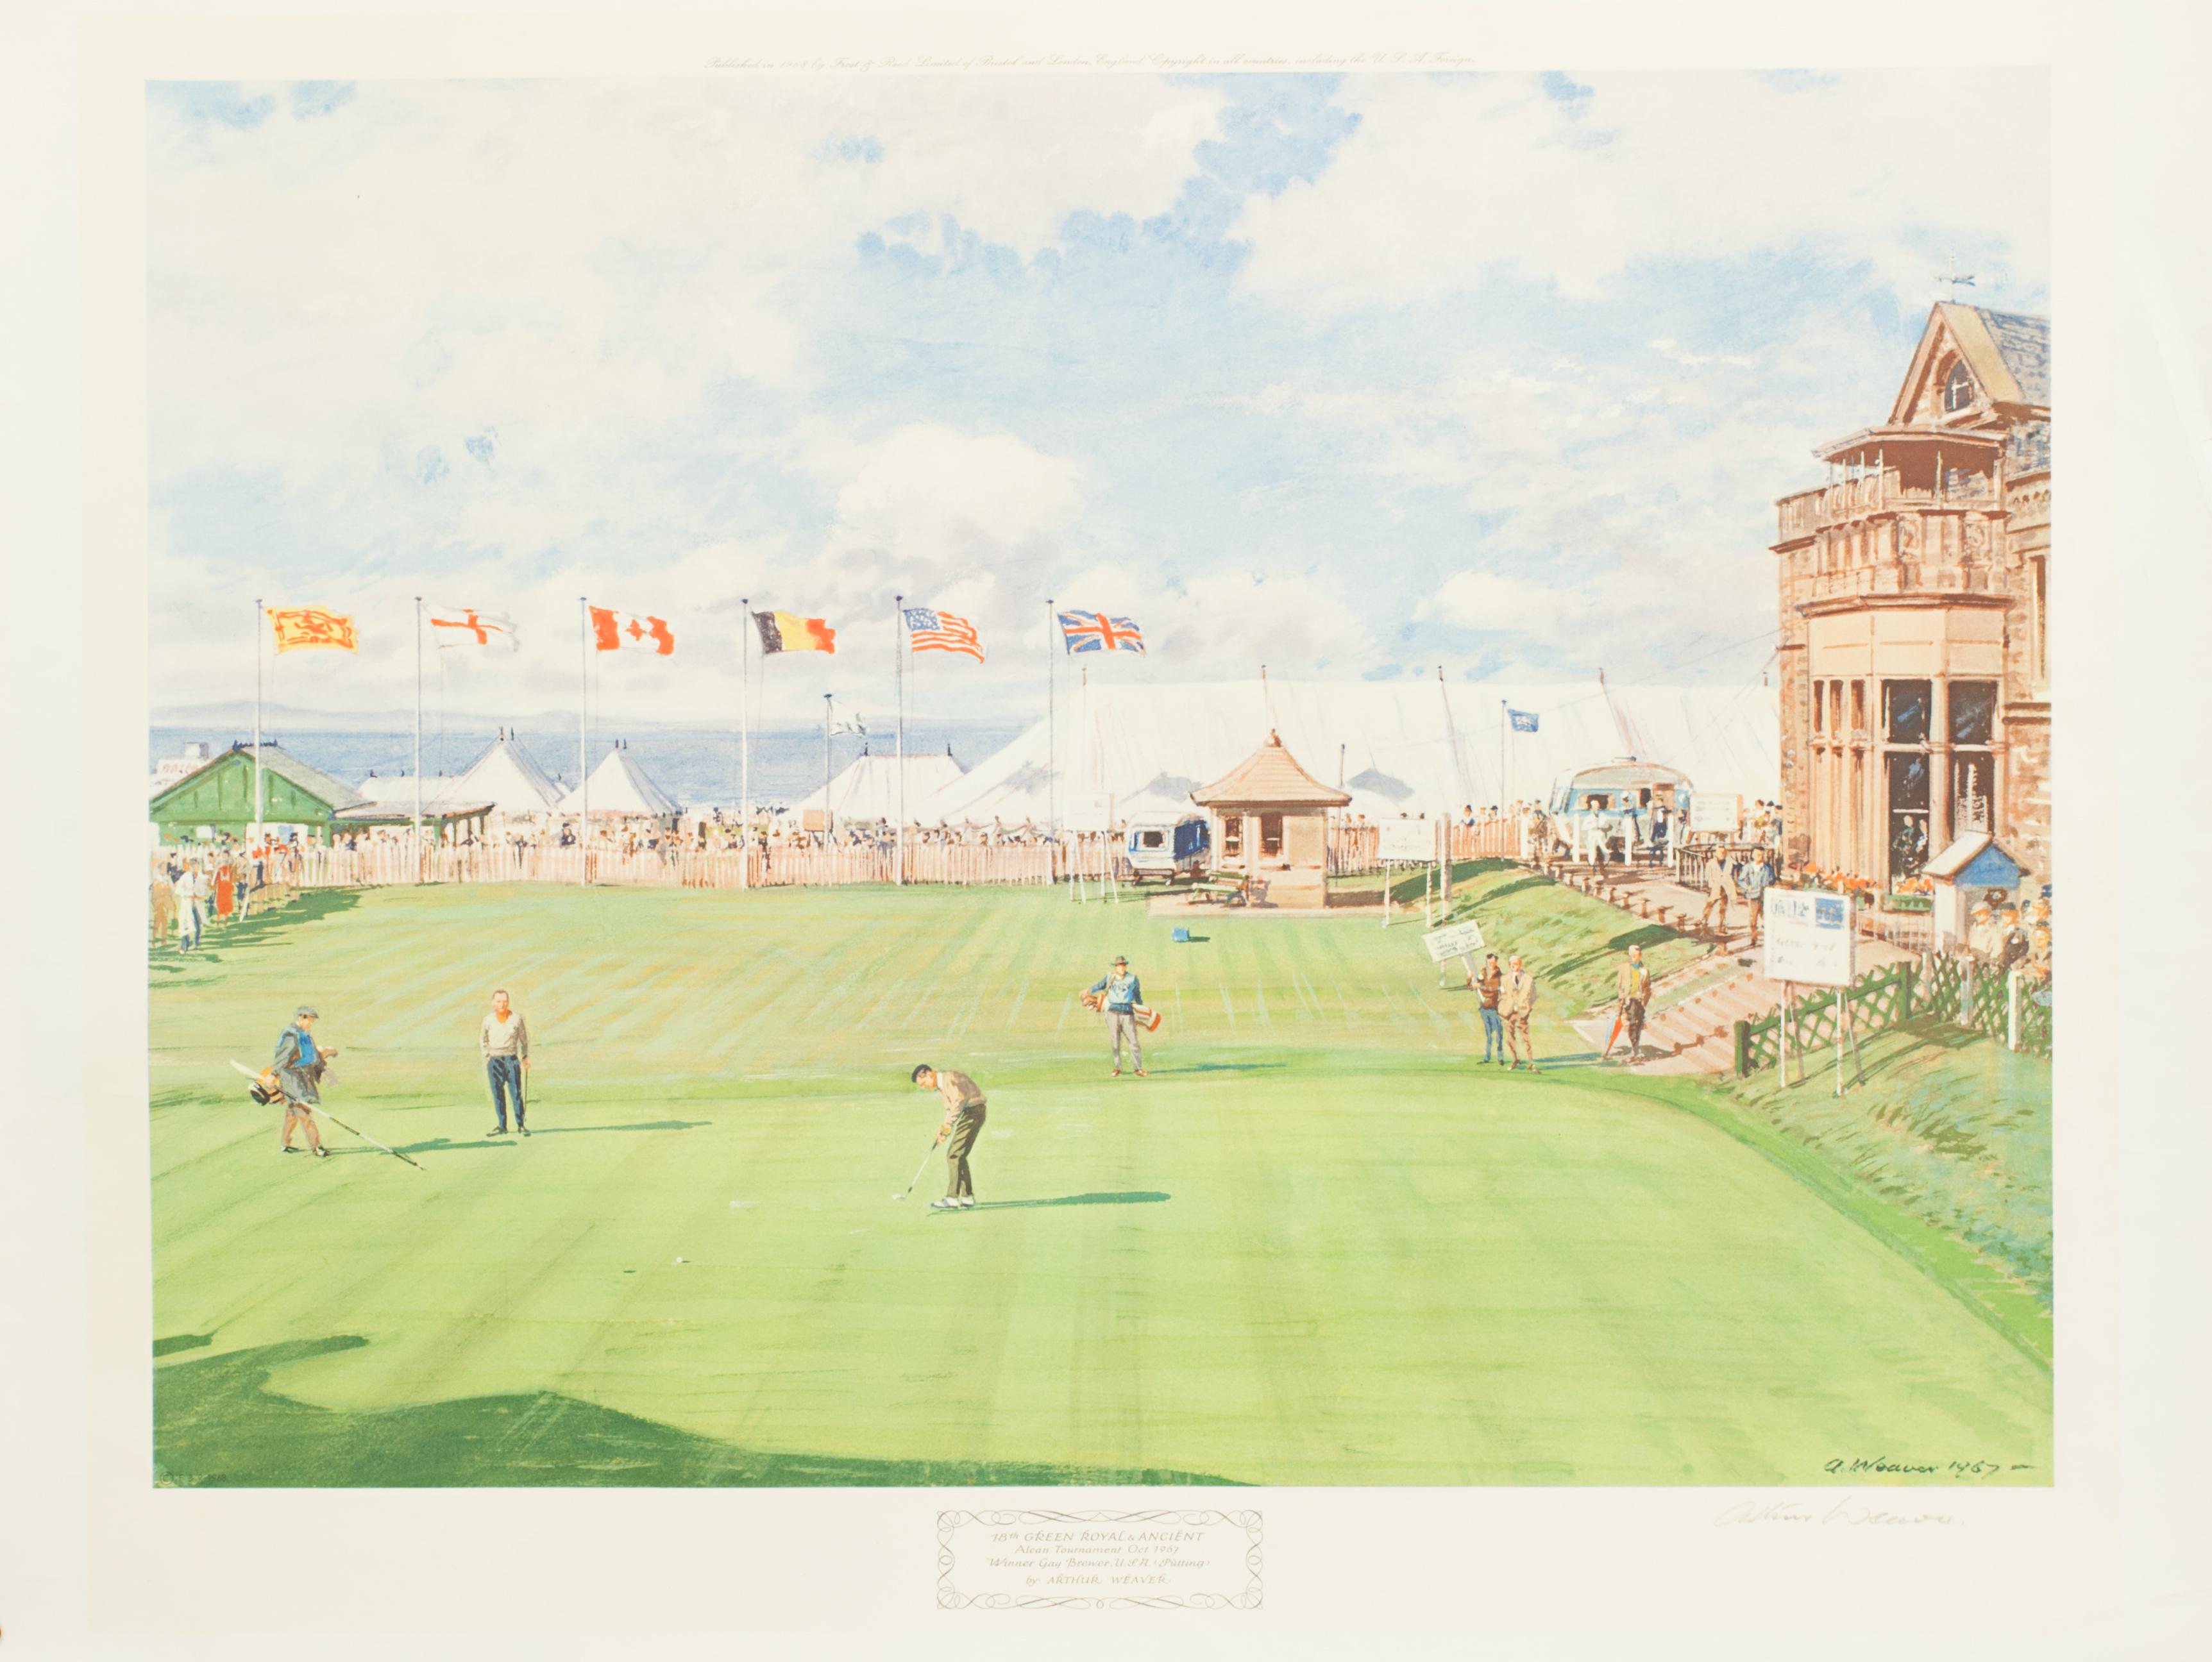 1967 Alcan Golfer of the Year Championship By Arthur Weaver.
A colourful golf lithograph signed by the artist, Arthur Weaver, of the 18th green at St Andrews. The picture depicting Gay Brewer putting on the 18th green at St Andrews (Royal and